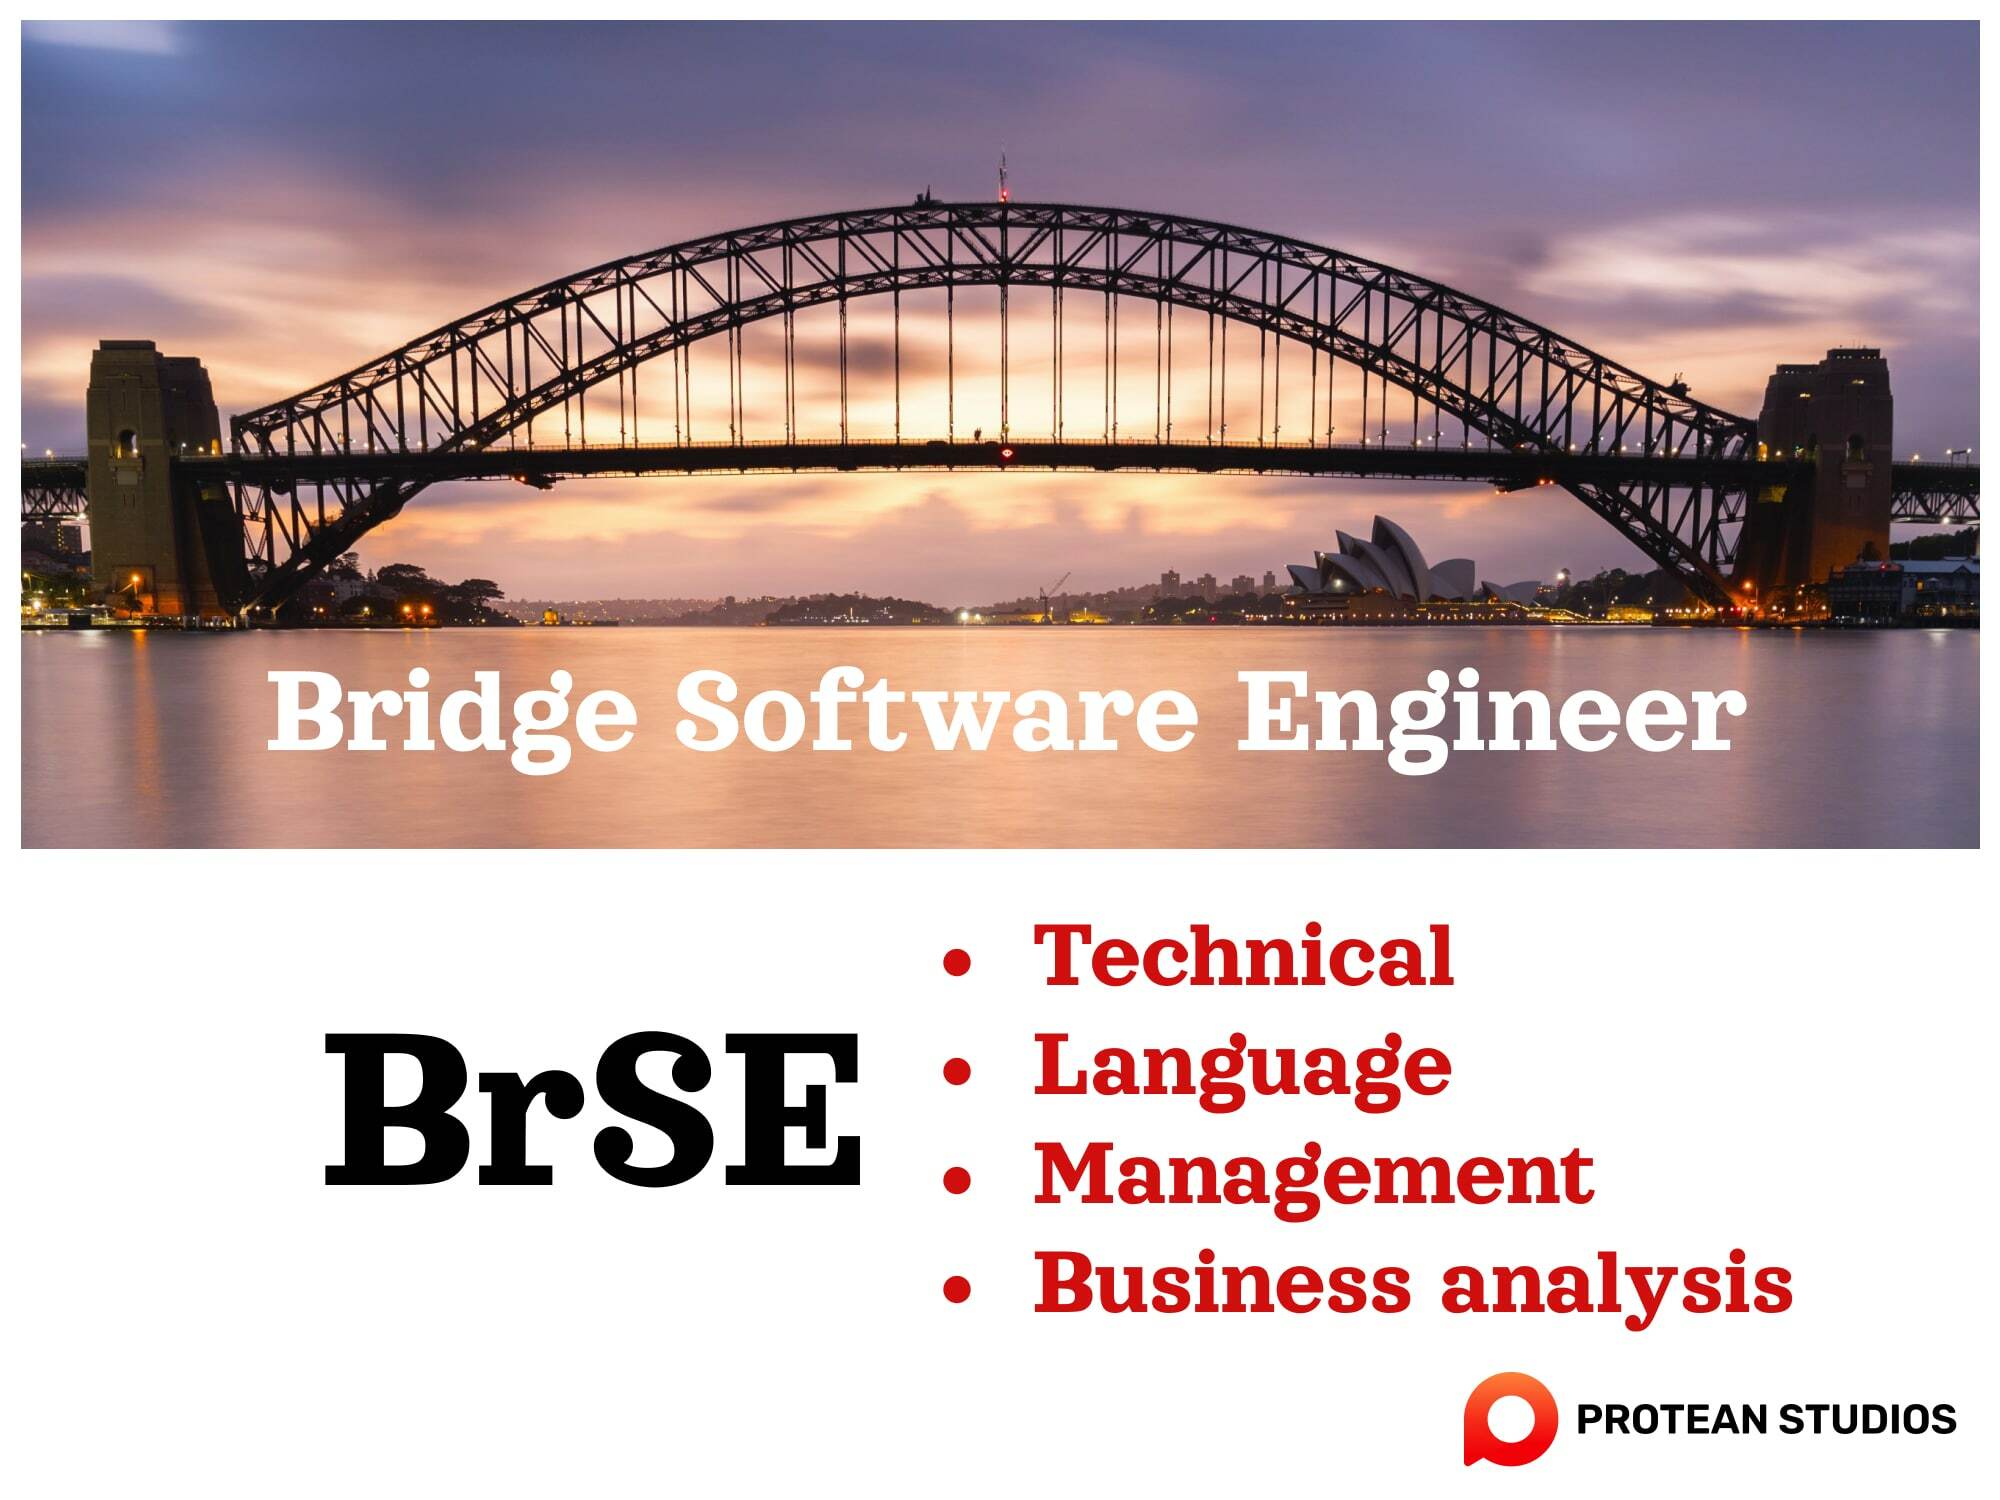 BrSE will support IT teams and clients.